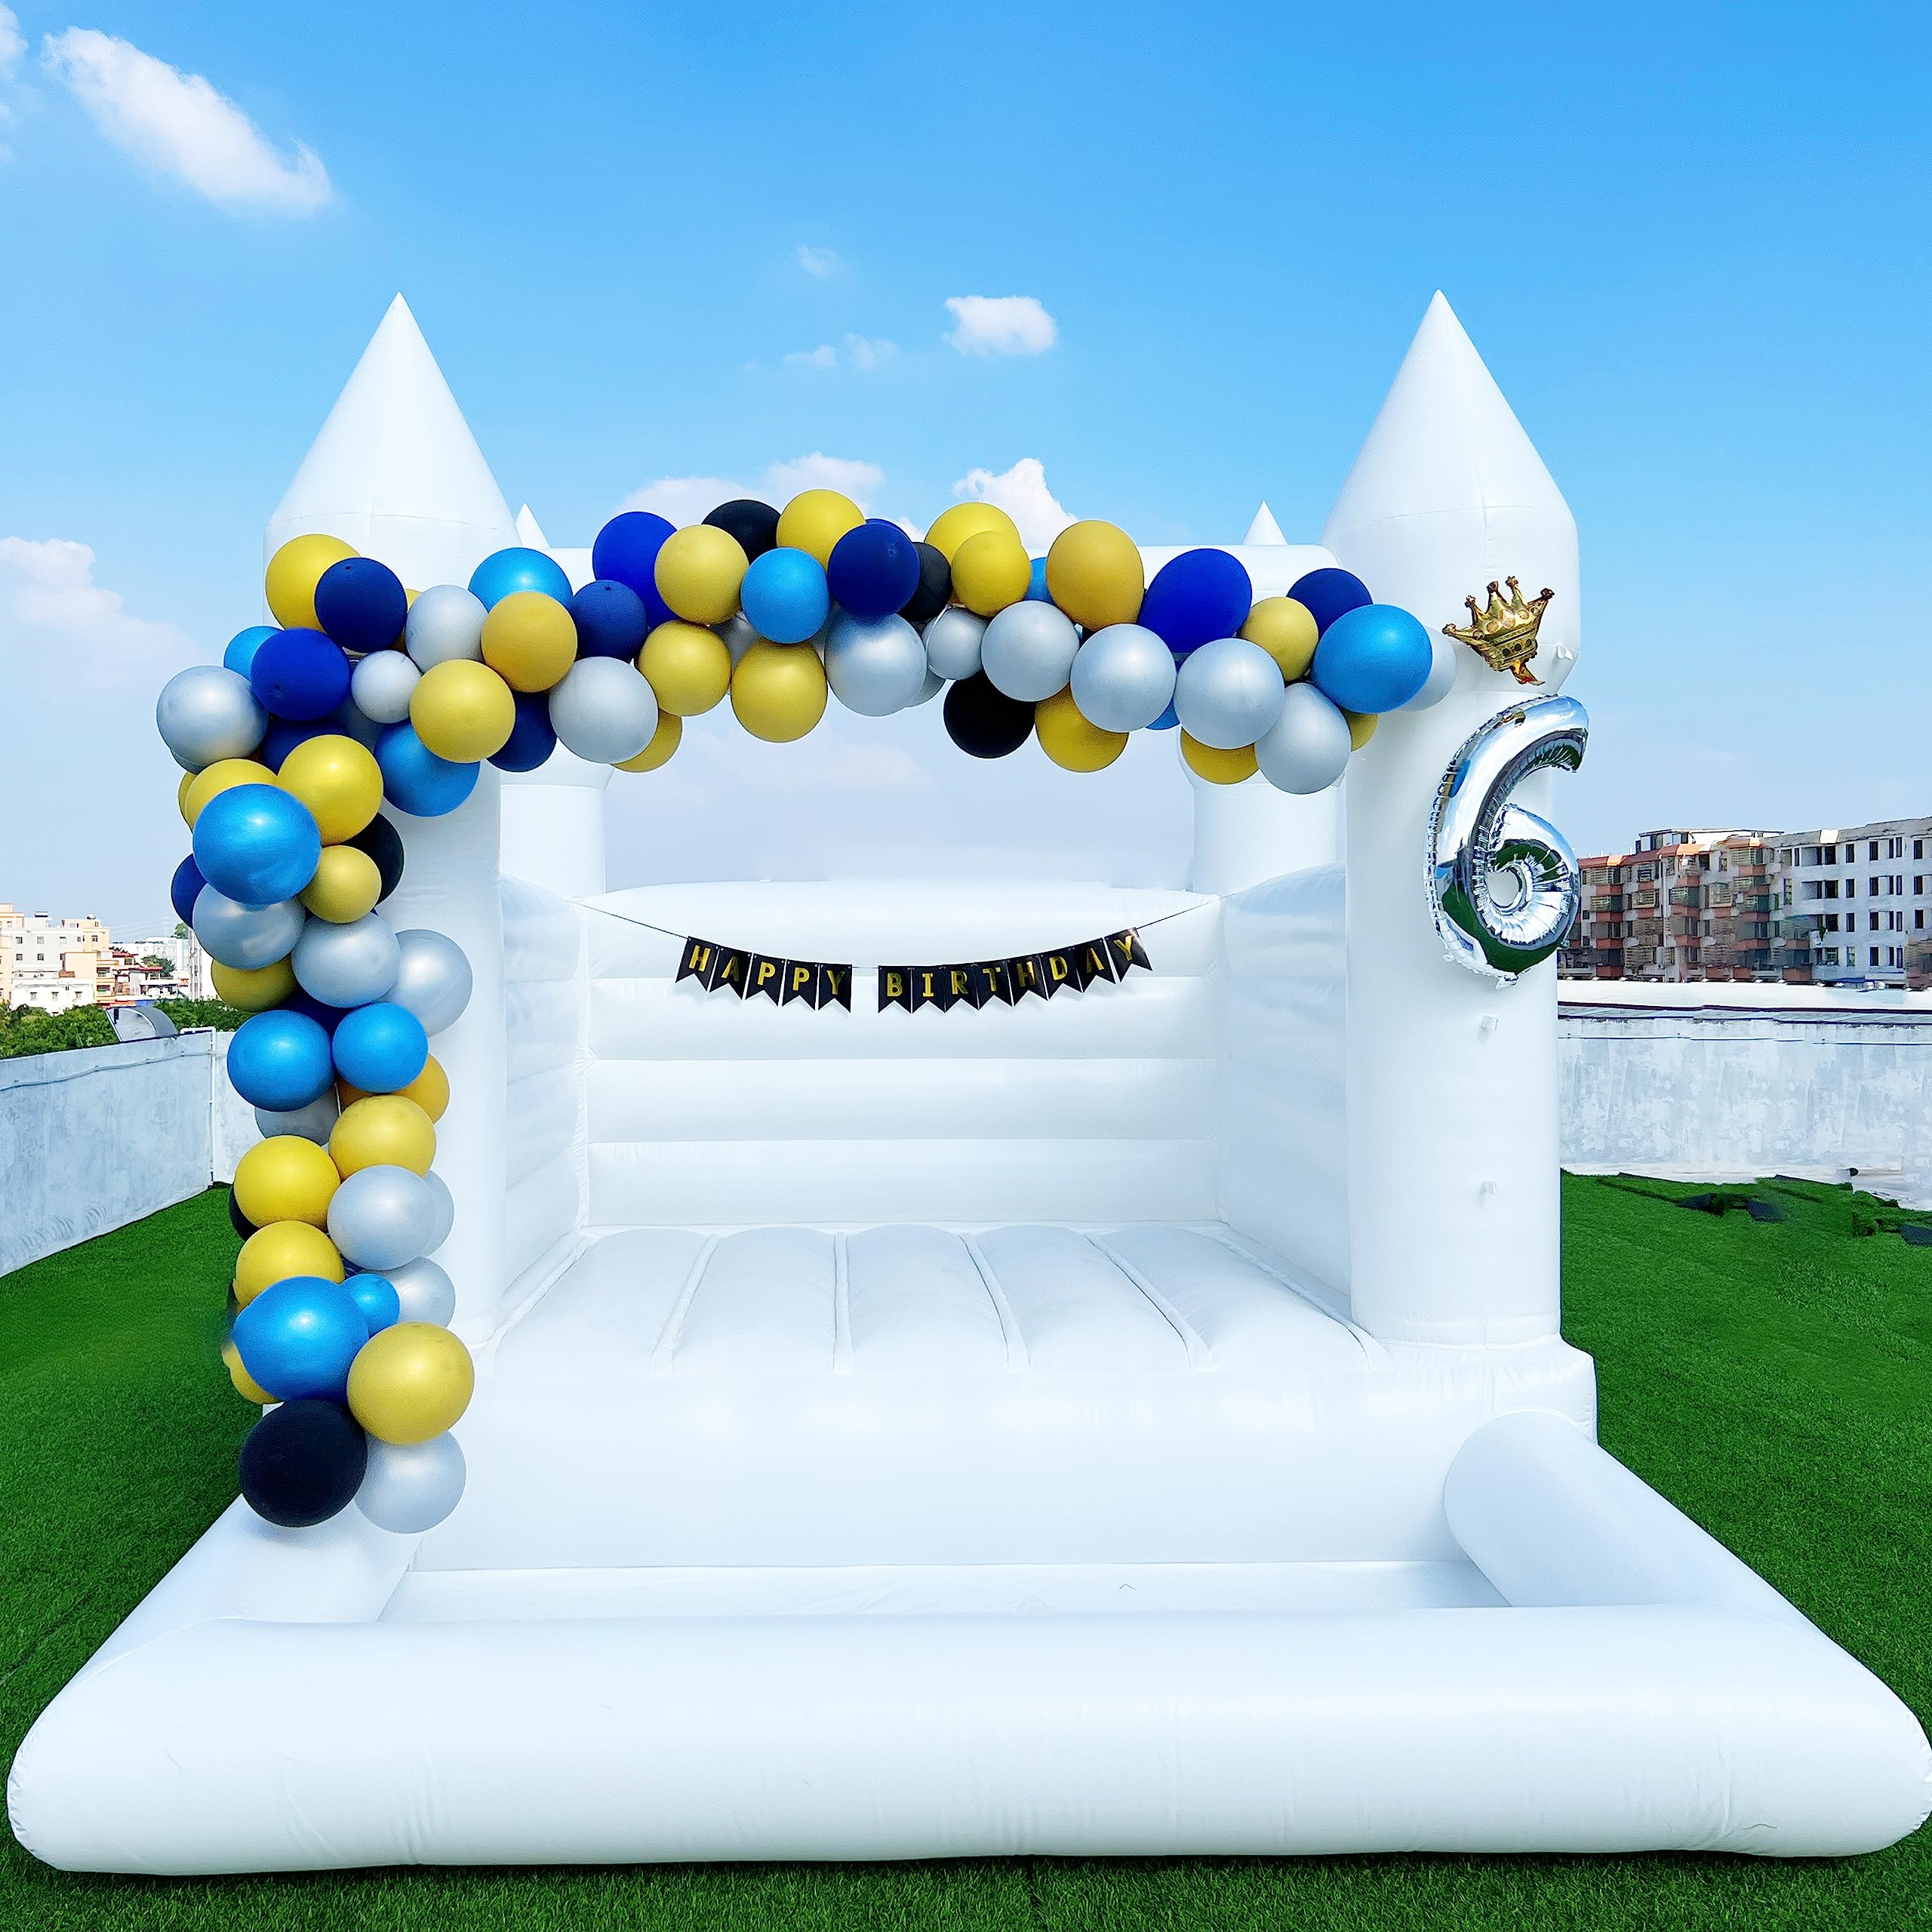 WARSUN Inflatable White Bounce House 13x10x10FT / 4x3x3m with Ball Pool&Blower All PVC Inflatable Jumper Bouncy Castle More Durable Bounce House Castle for Kids Birthday Wedding Party Business Photography